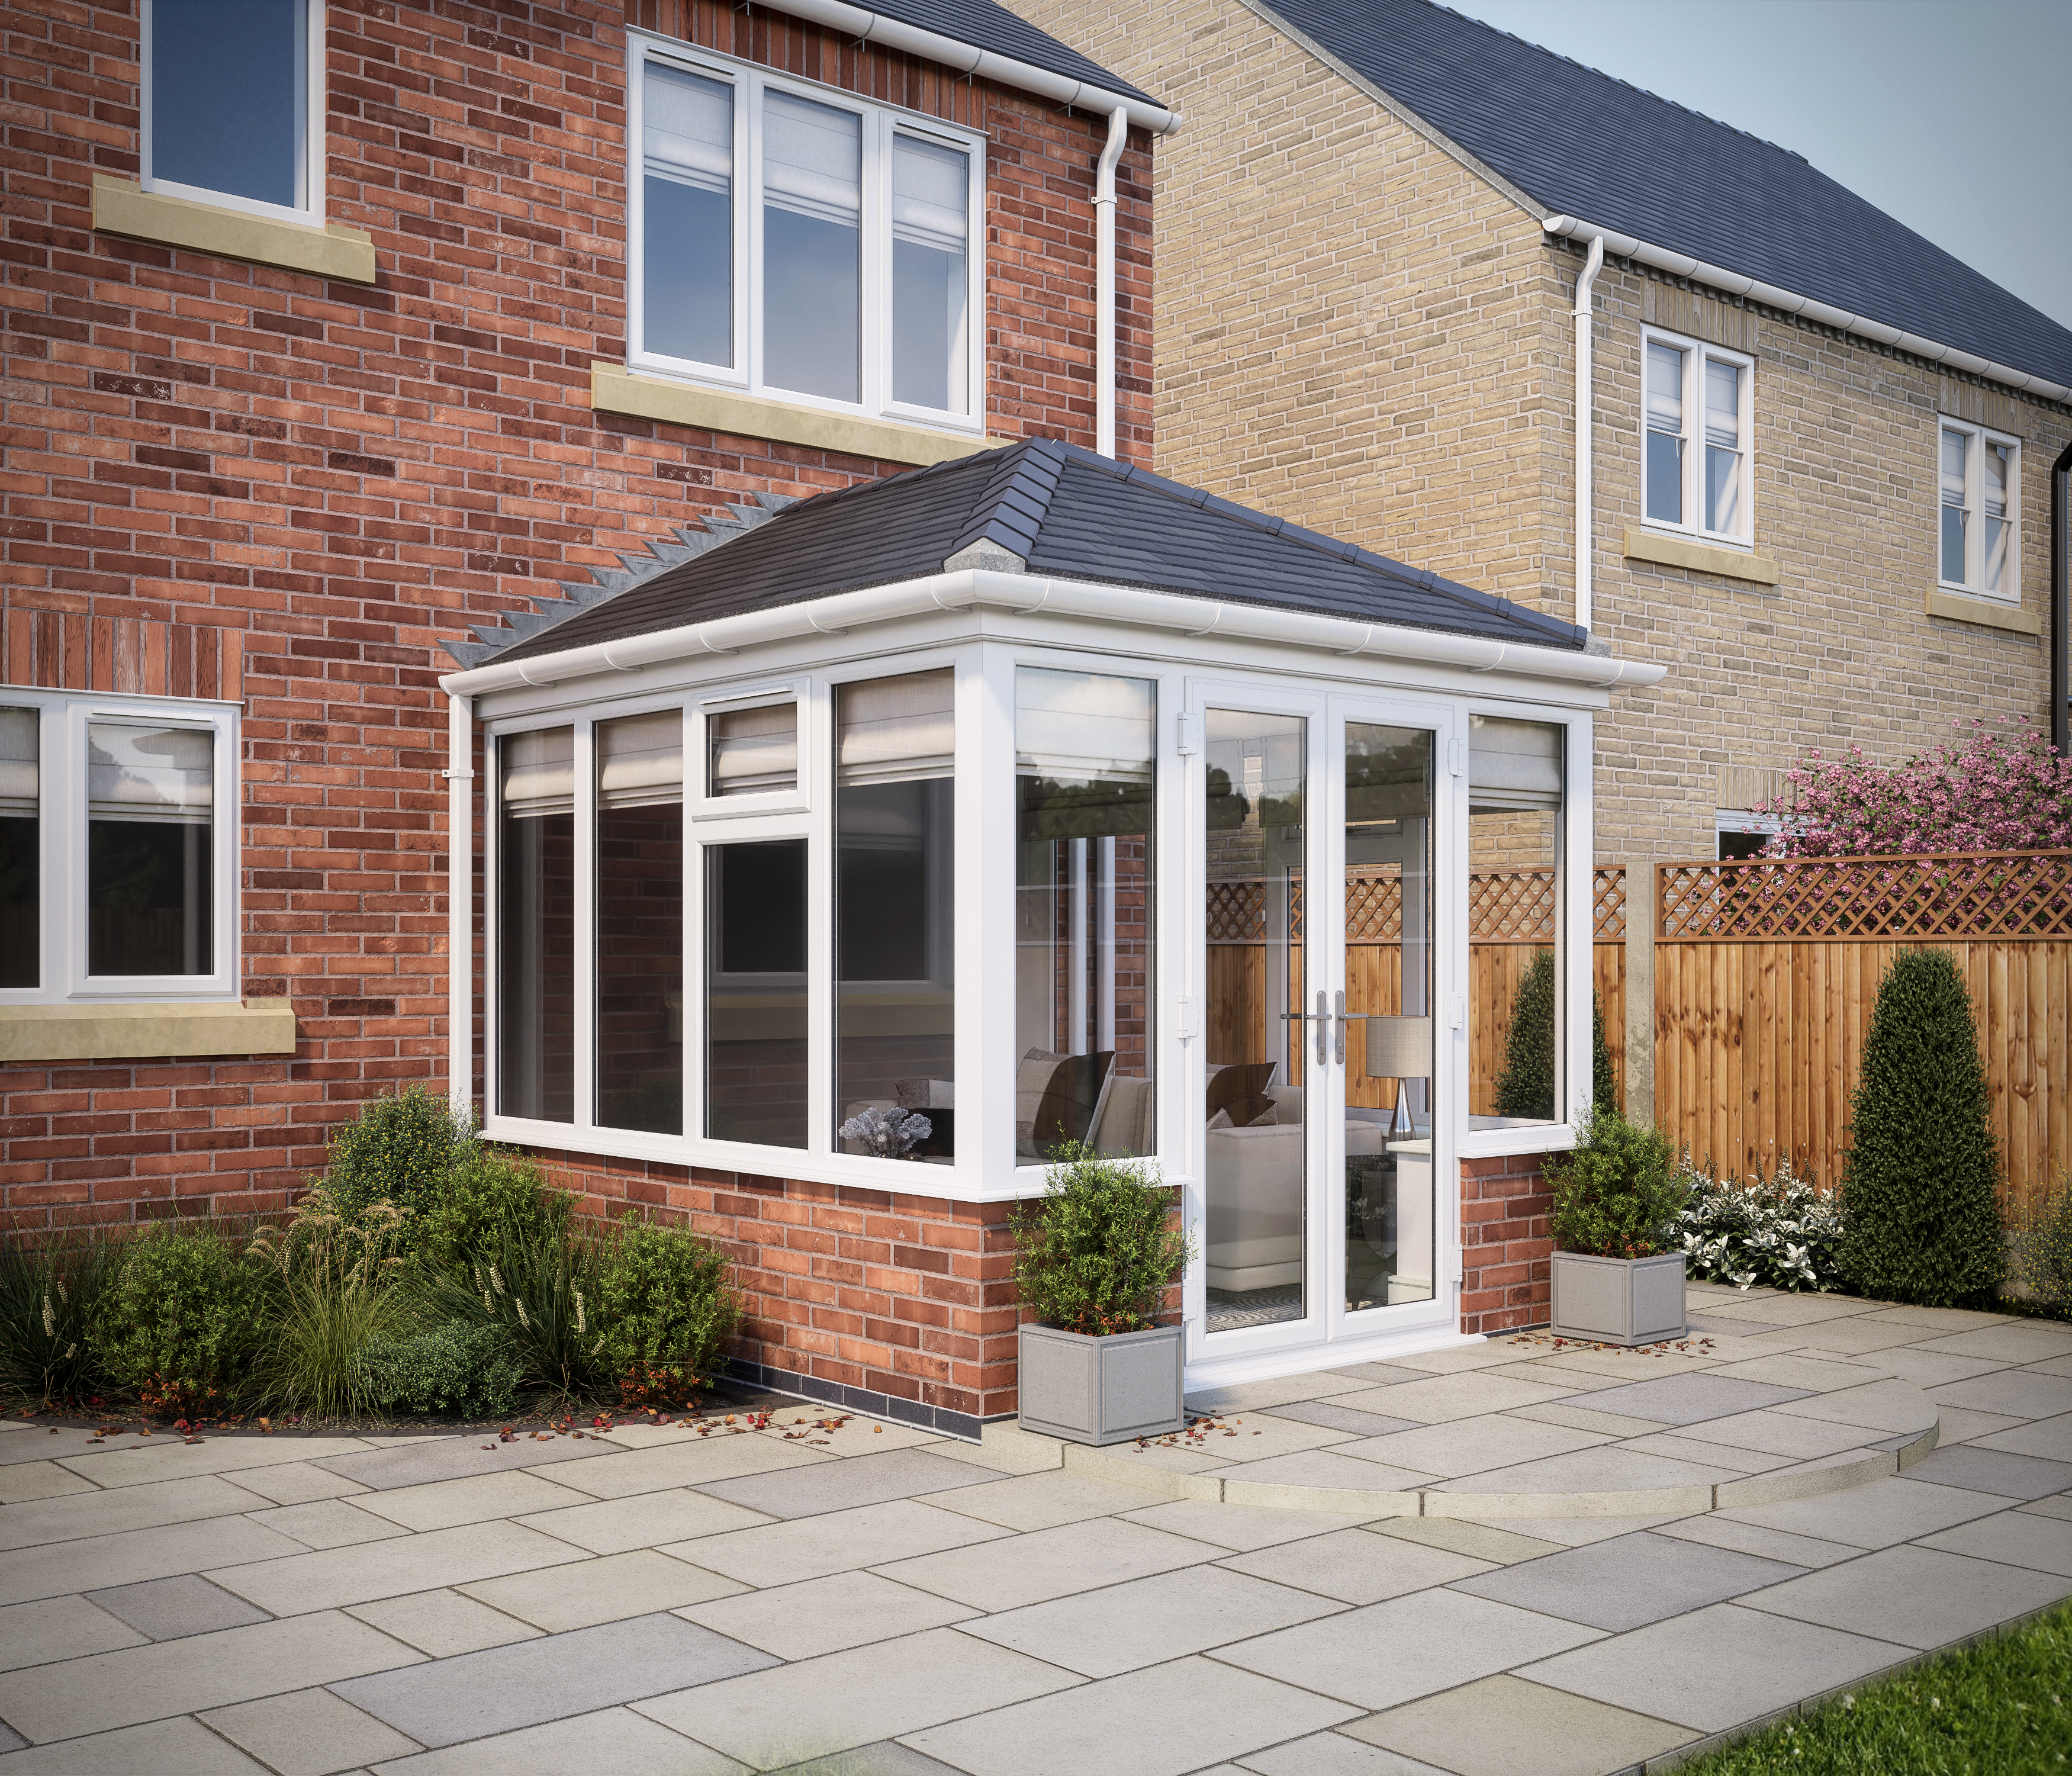 Image of SOLid Roof Edwardian Conservatory White Frames Dwarf Wall with Titanium Grey Tiles - 10 x 10ft